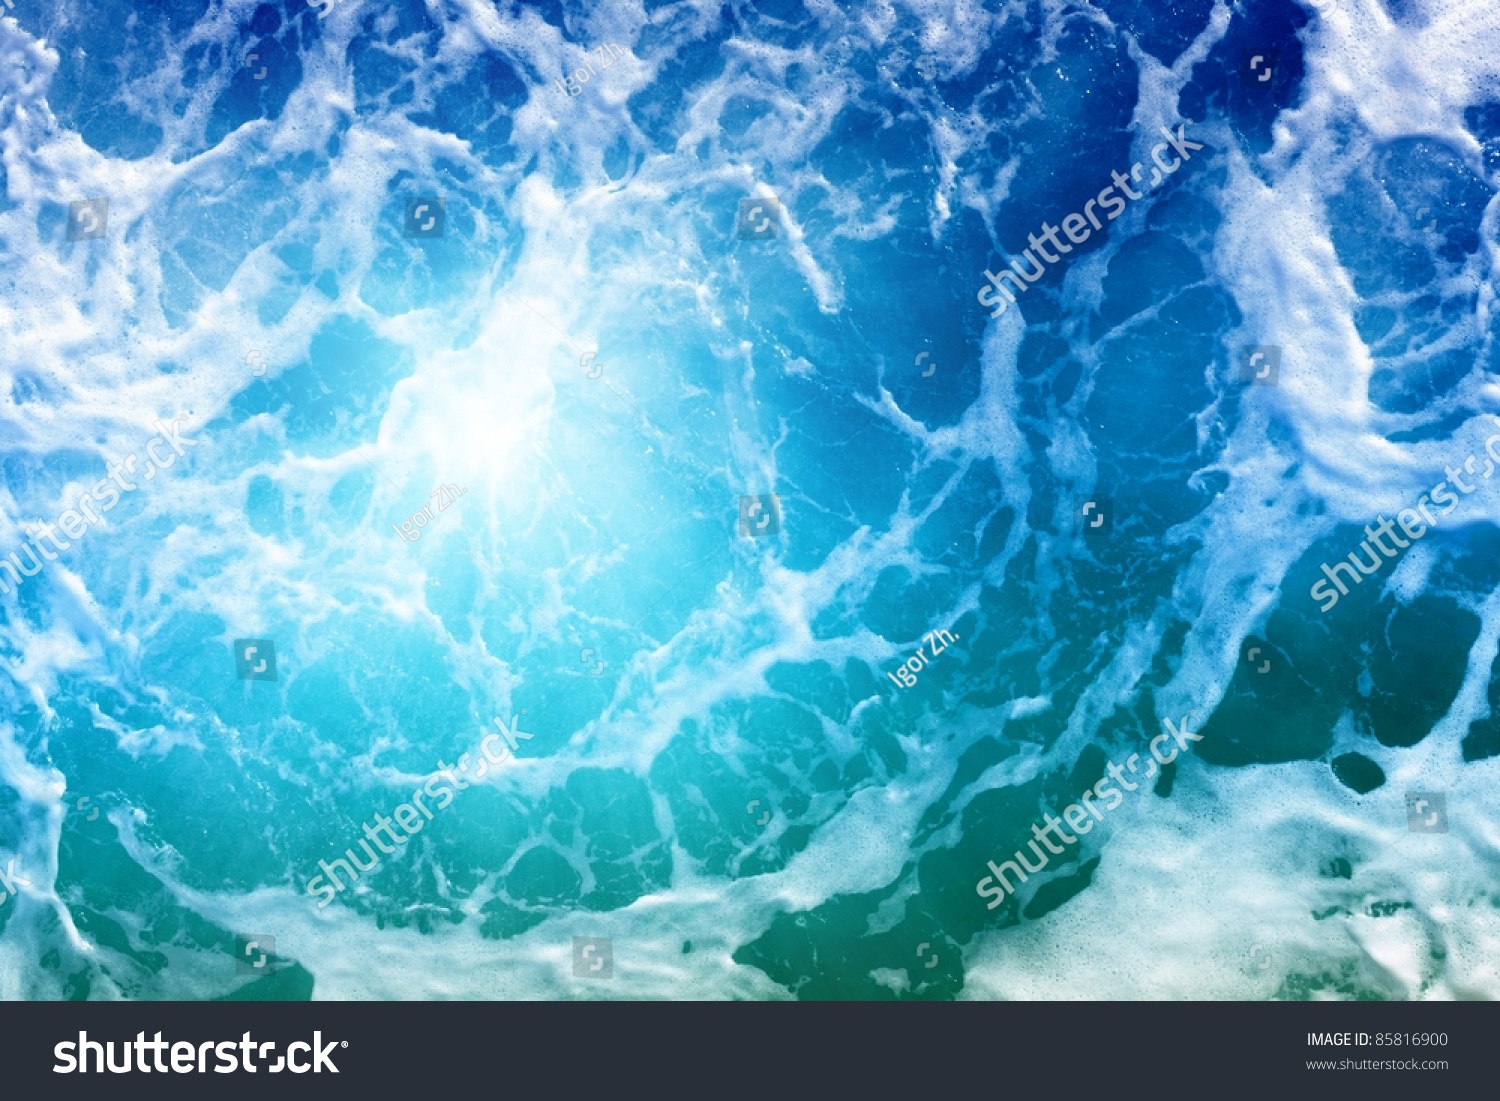 Abstract background - blue water with bright sunlight #85816900